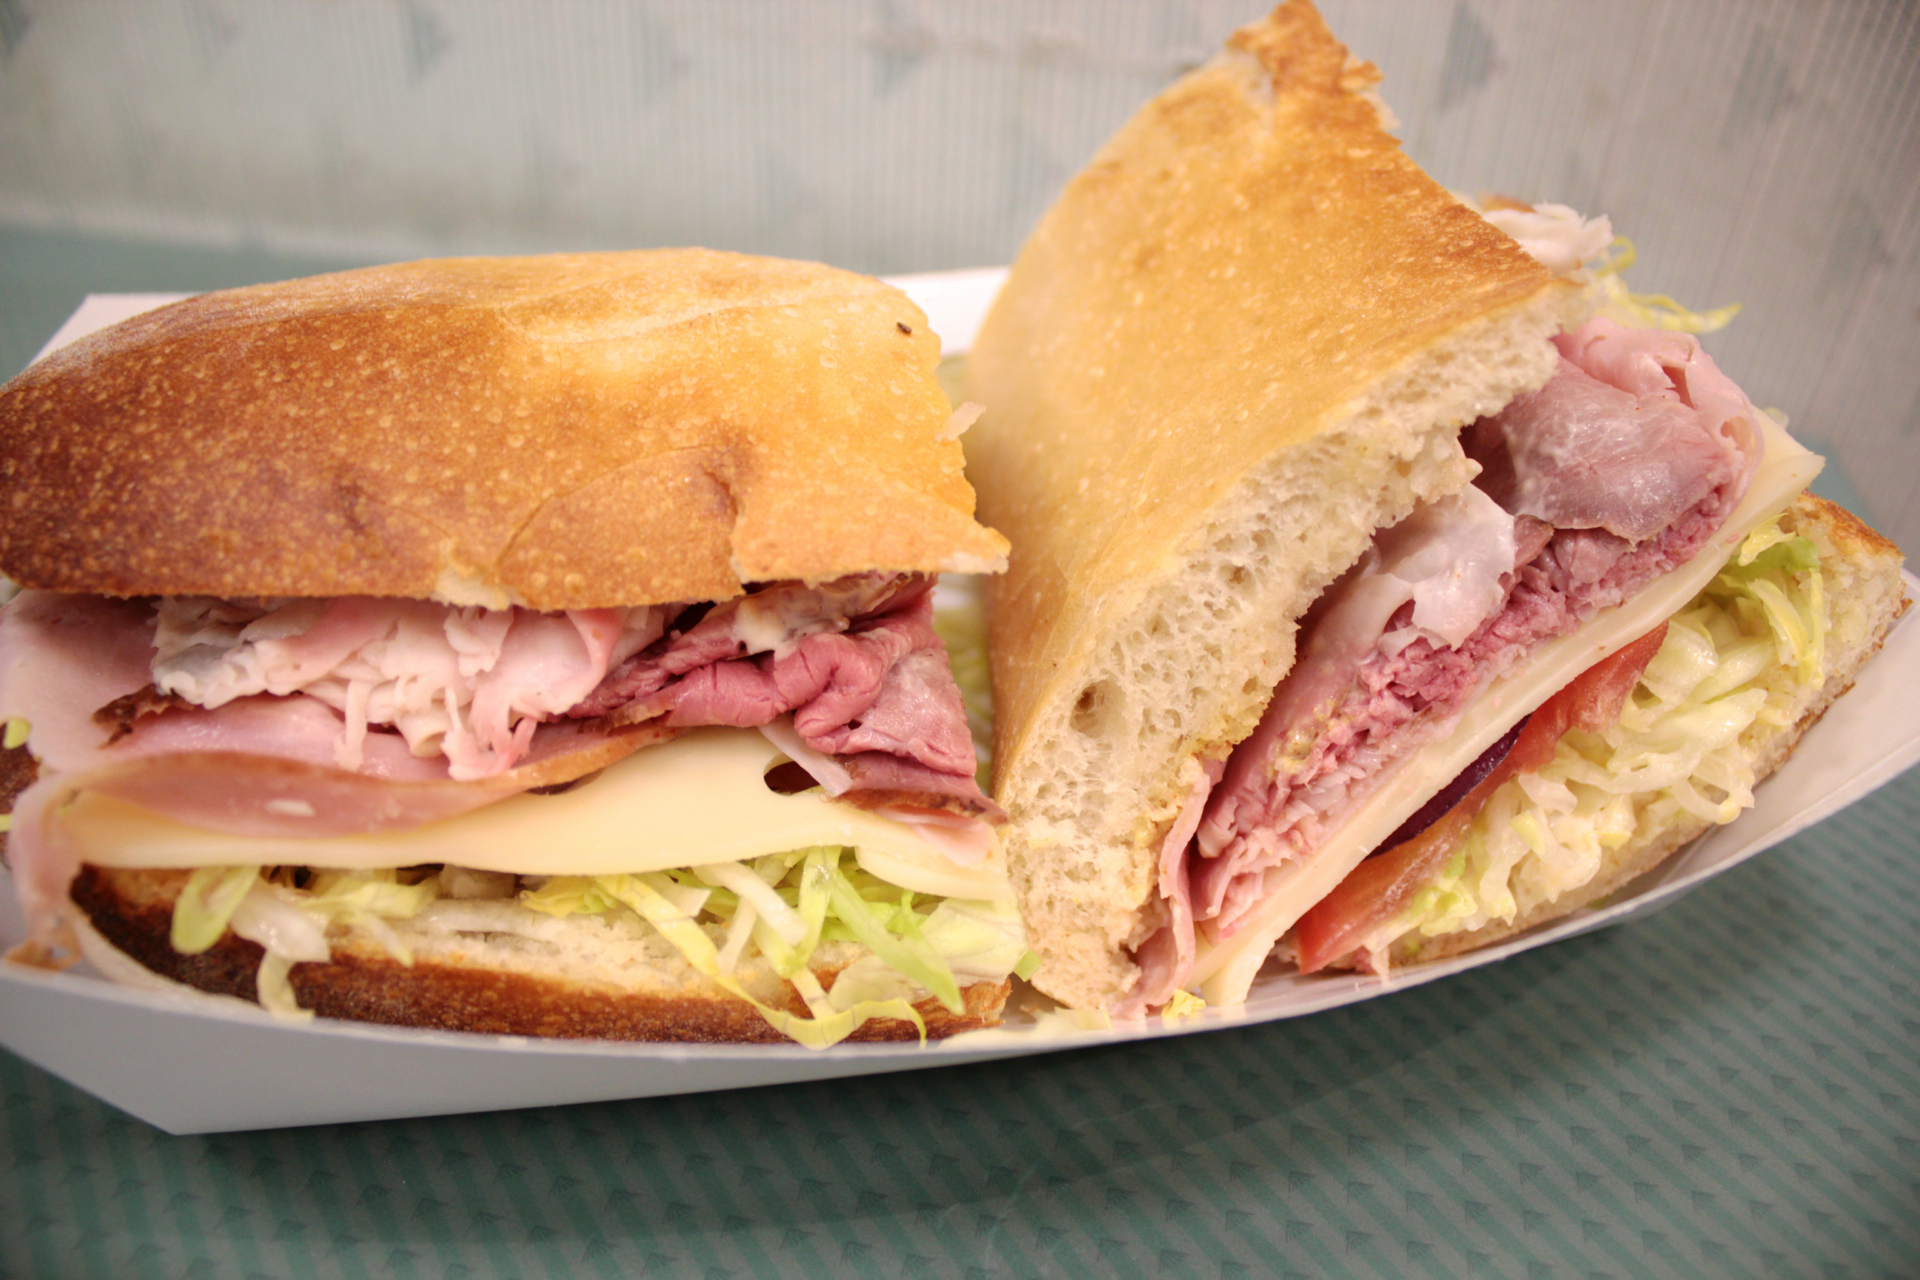 The classic sandwich at Freshly Baked Eatery with roast beef, country ham and turkey.